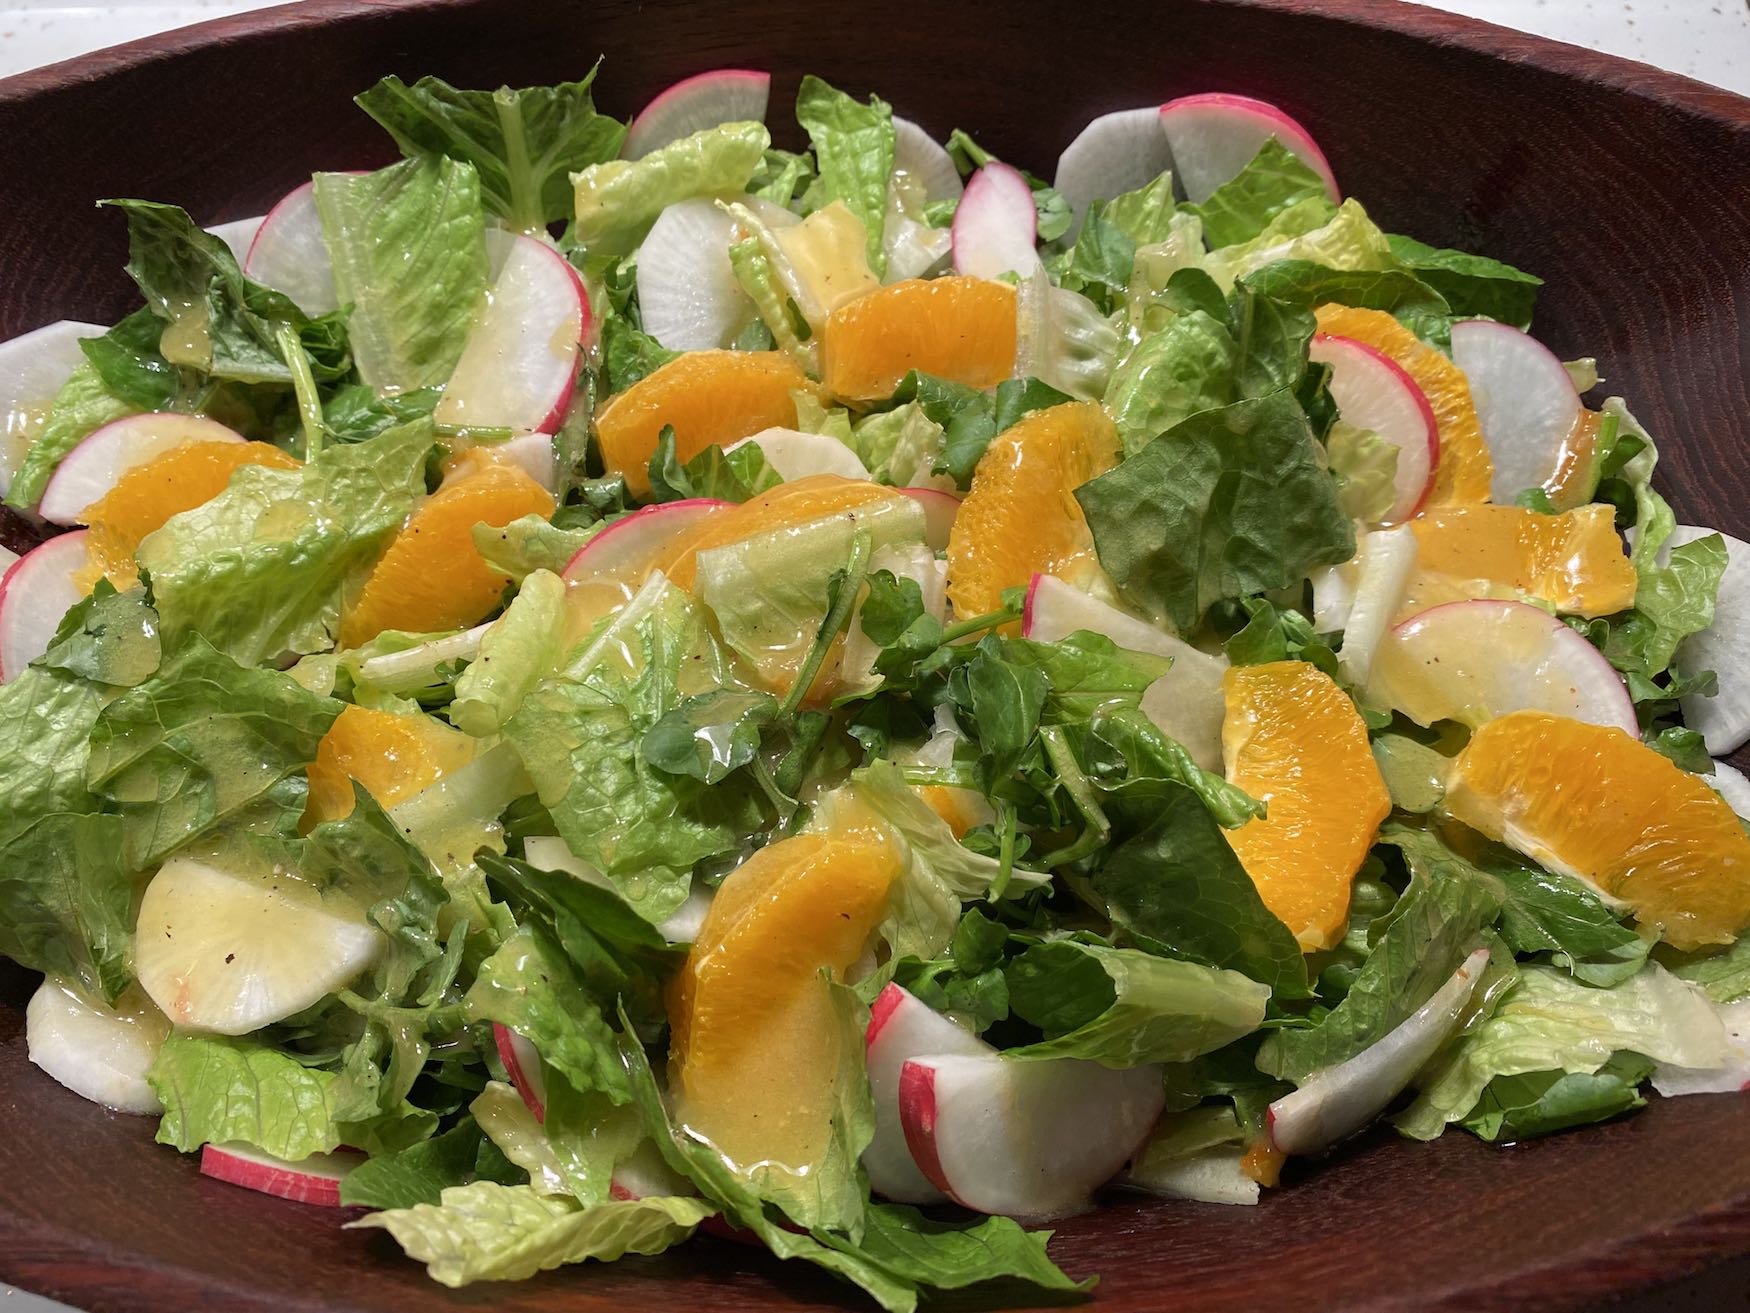 Spicy Salad with Citrus Marmalade Dressing